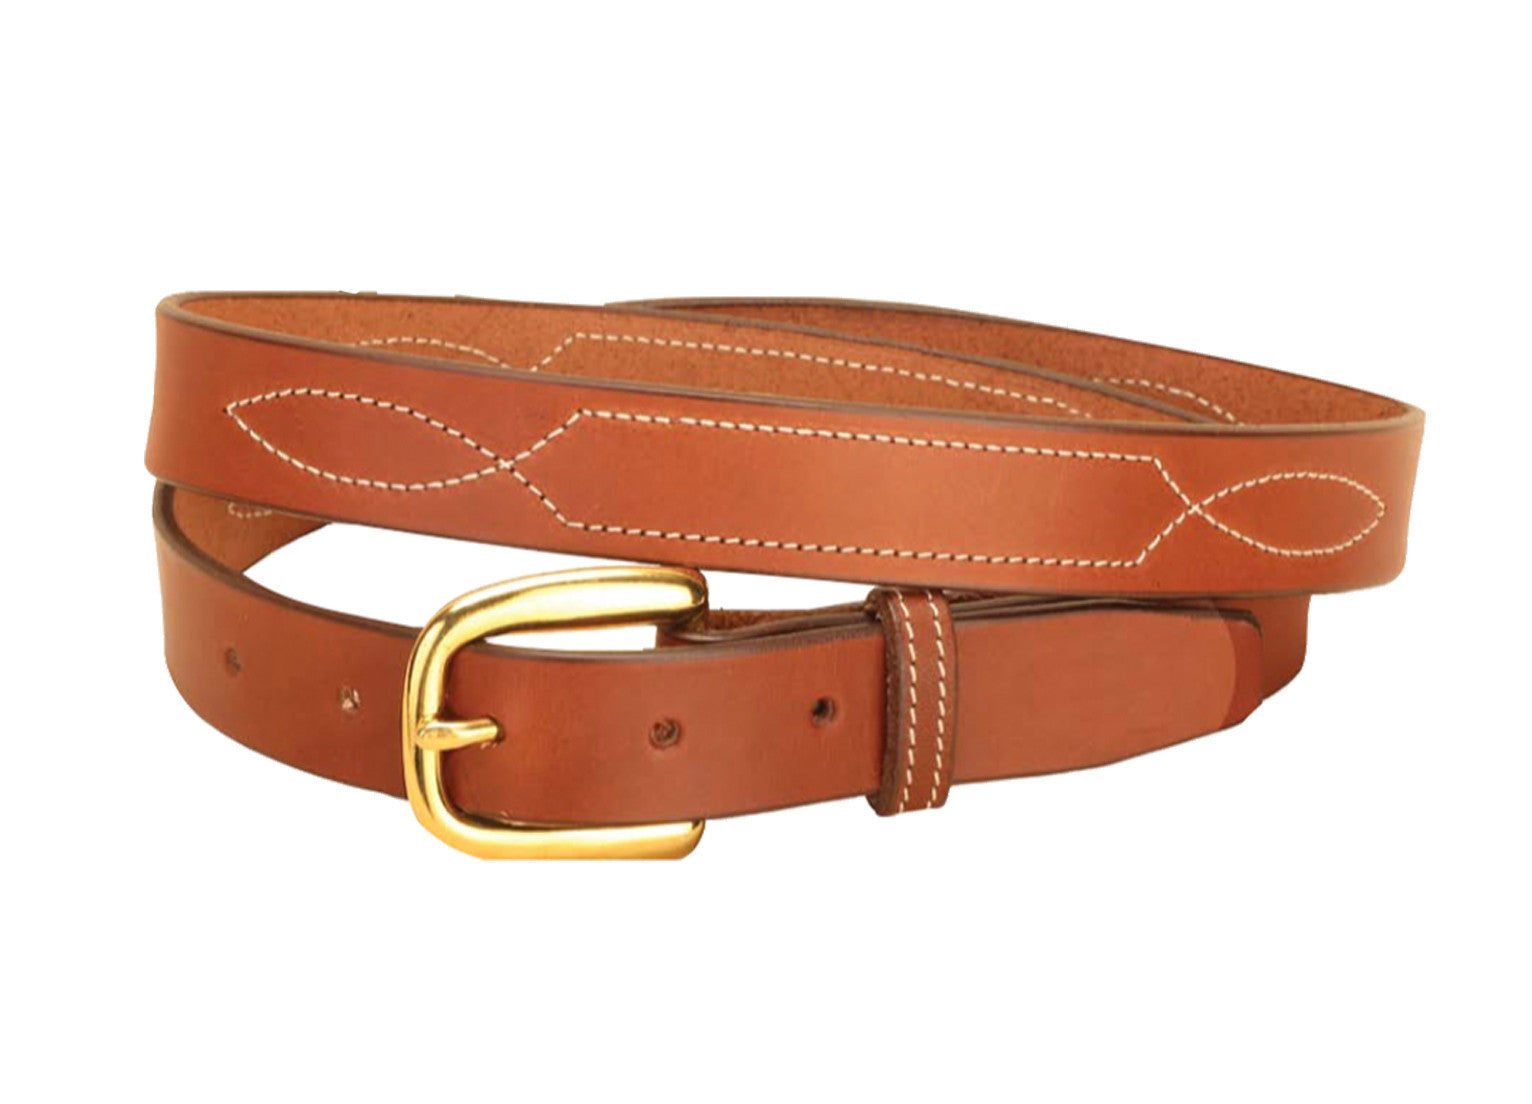 Tory Leather 1” Stitched Pattern Leather Belt - North Shore Saddlery